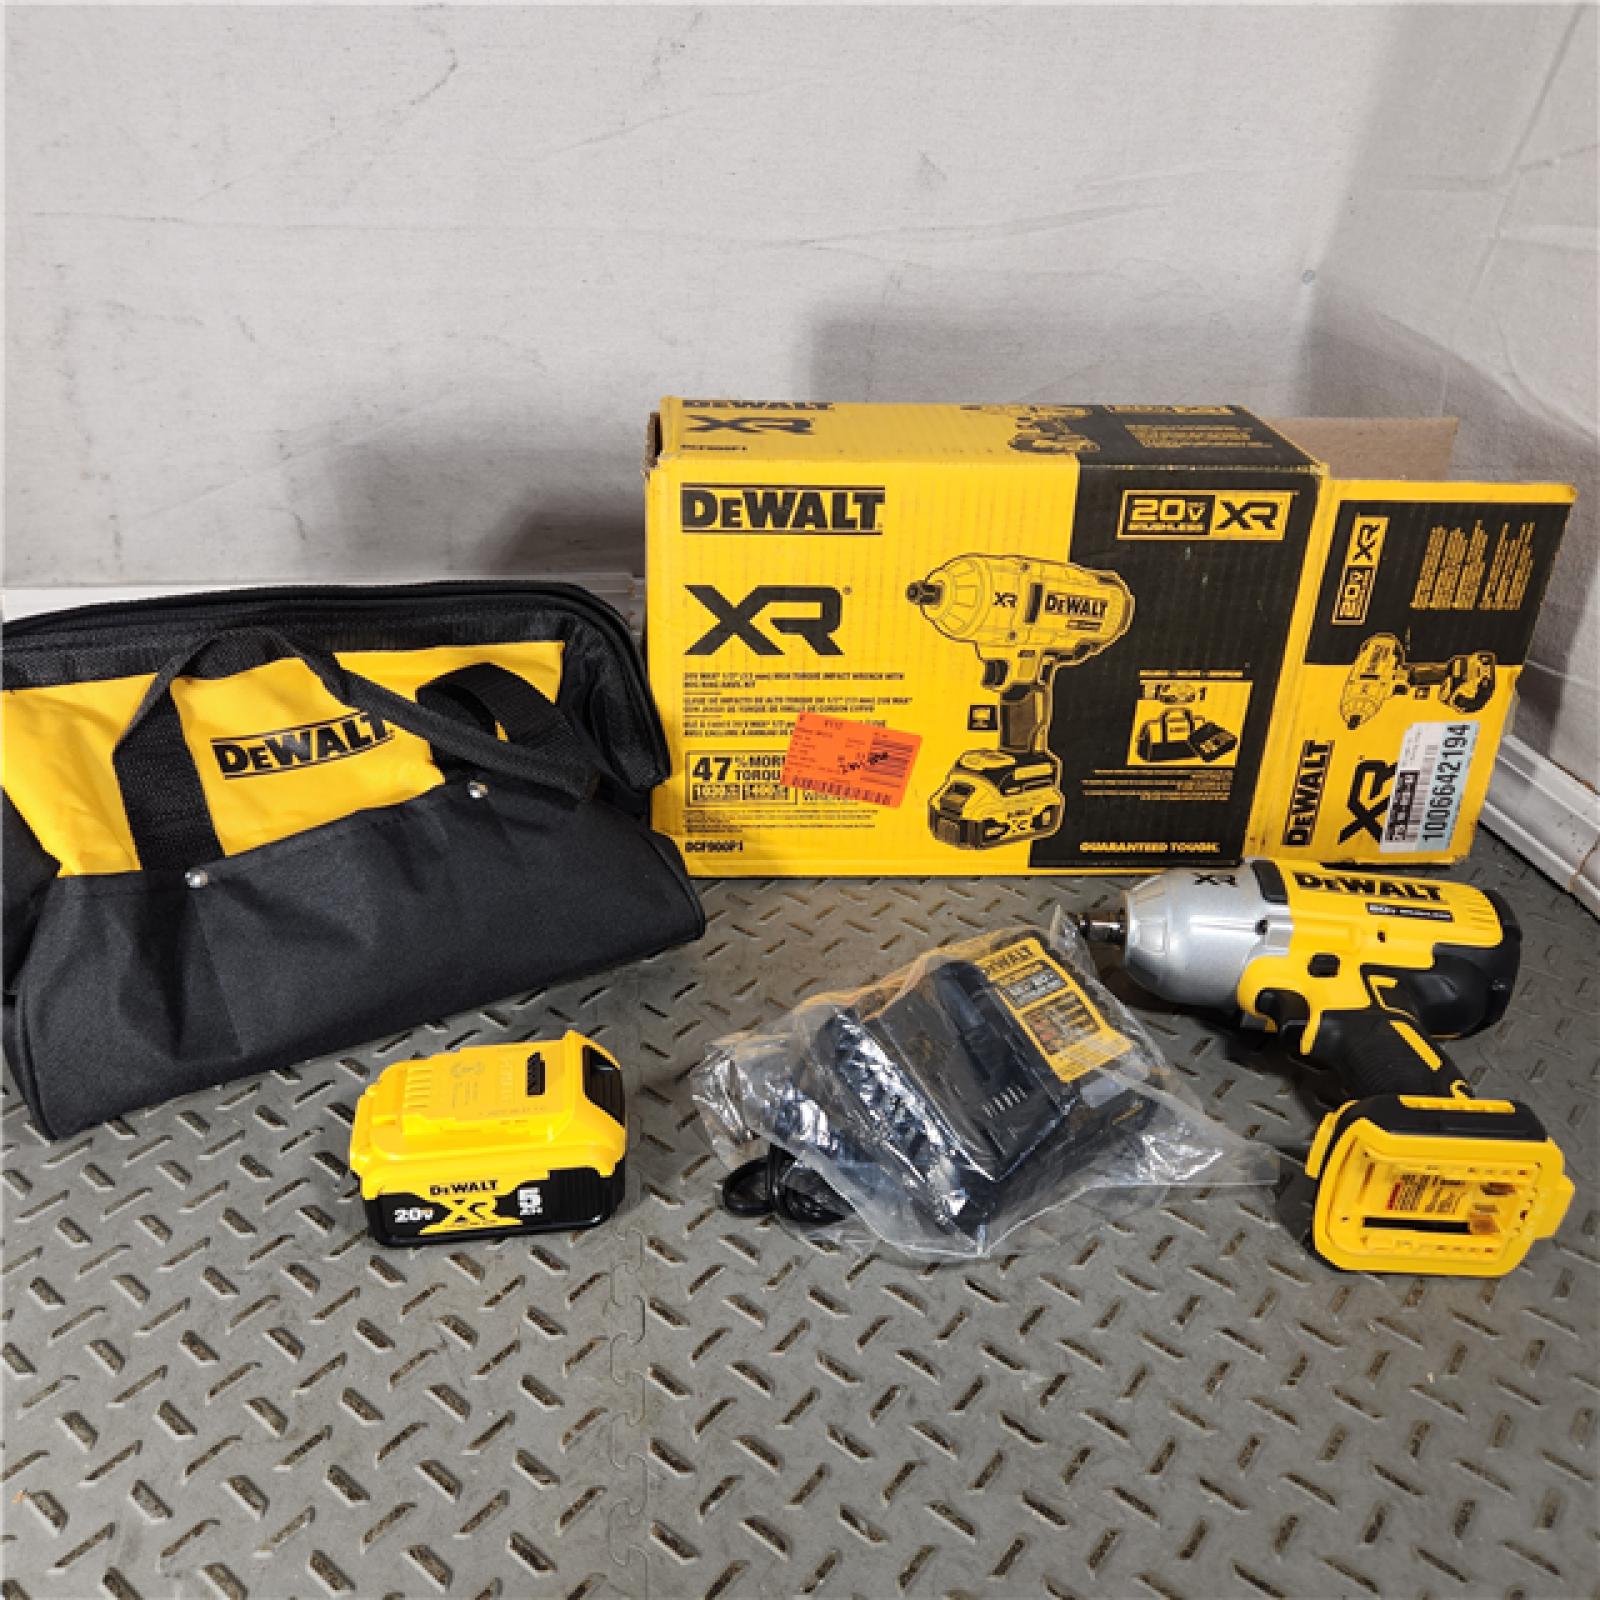 Houston Location - AS-IS DEWALT 20V MAX XR 1/2 Mid-Range Impact Wrench with Hog Ring Anvil Kit - Appears IN GOOD Condition